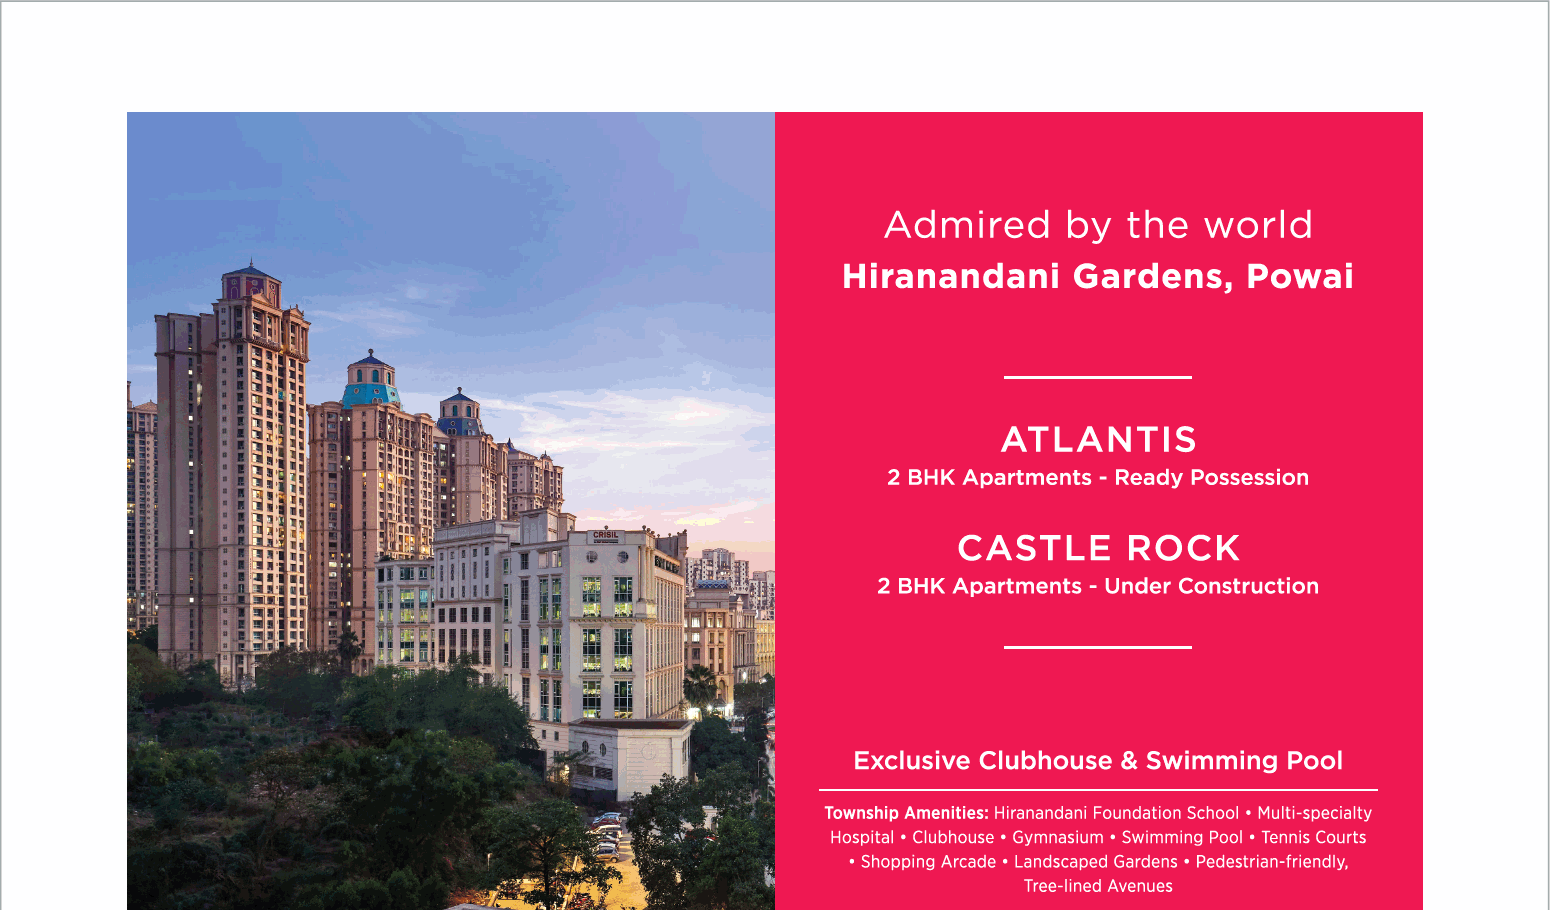 Admired by the beauty of world Hiranandani Gardens, Powai, The Tower Atlantis and  Castle Rock